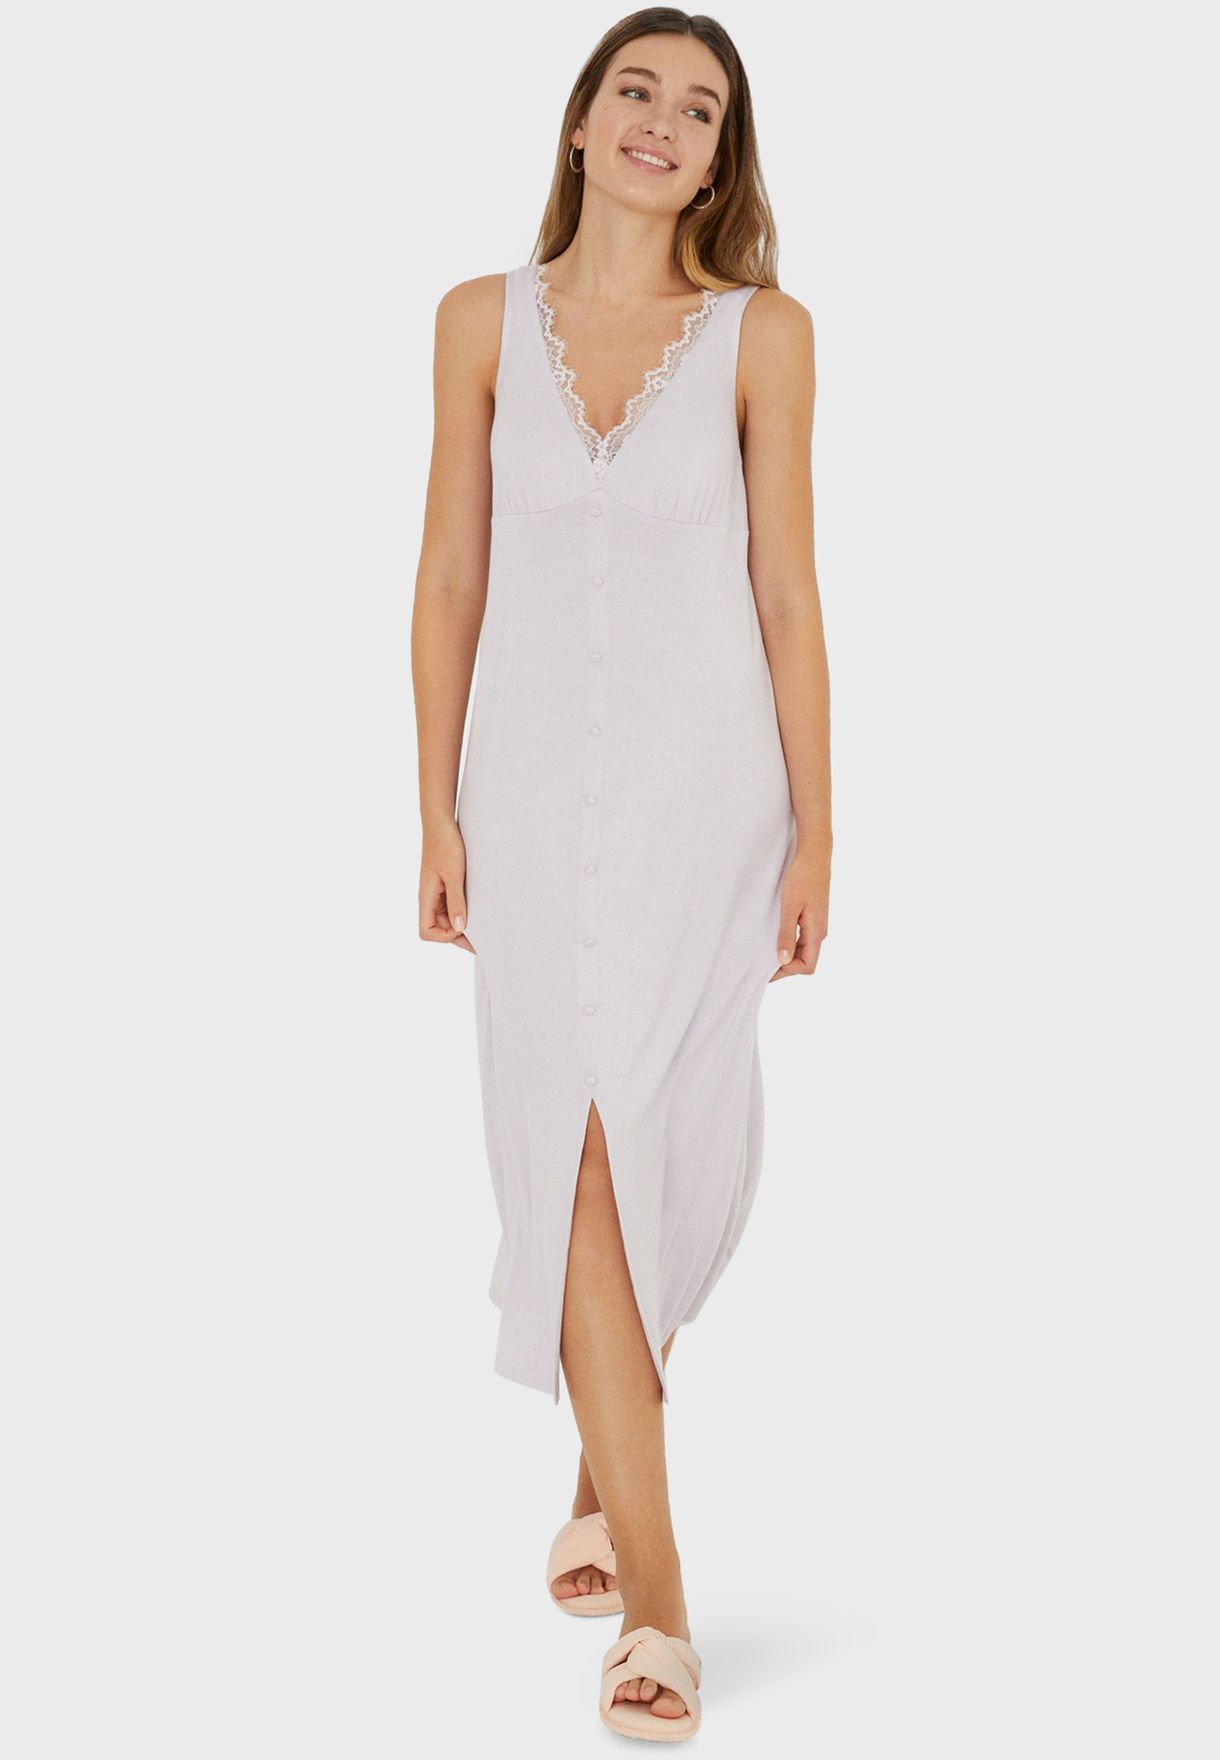 Lace Detail Front Slit Nightdress